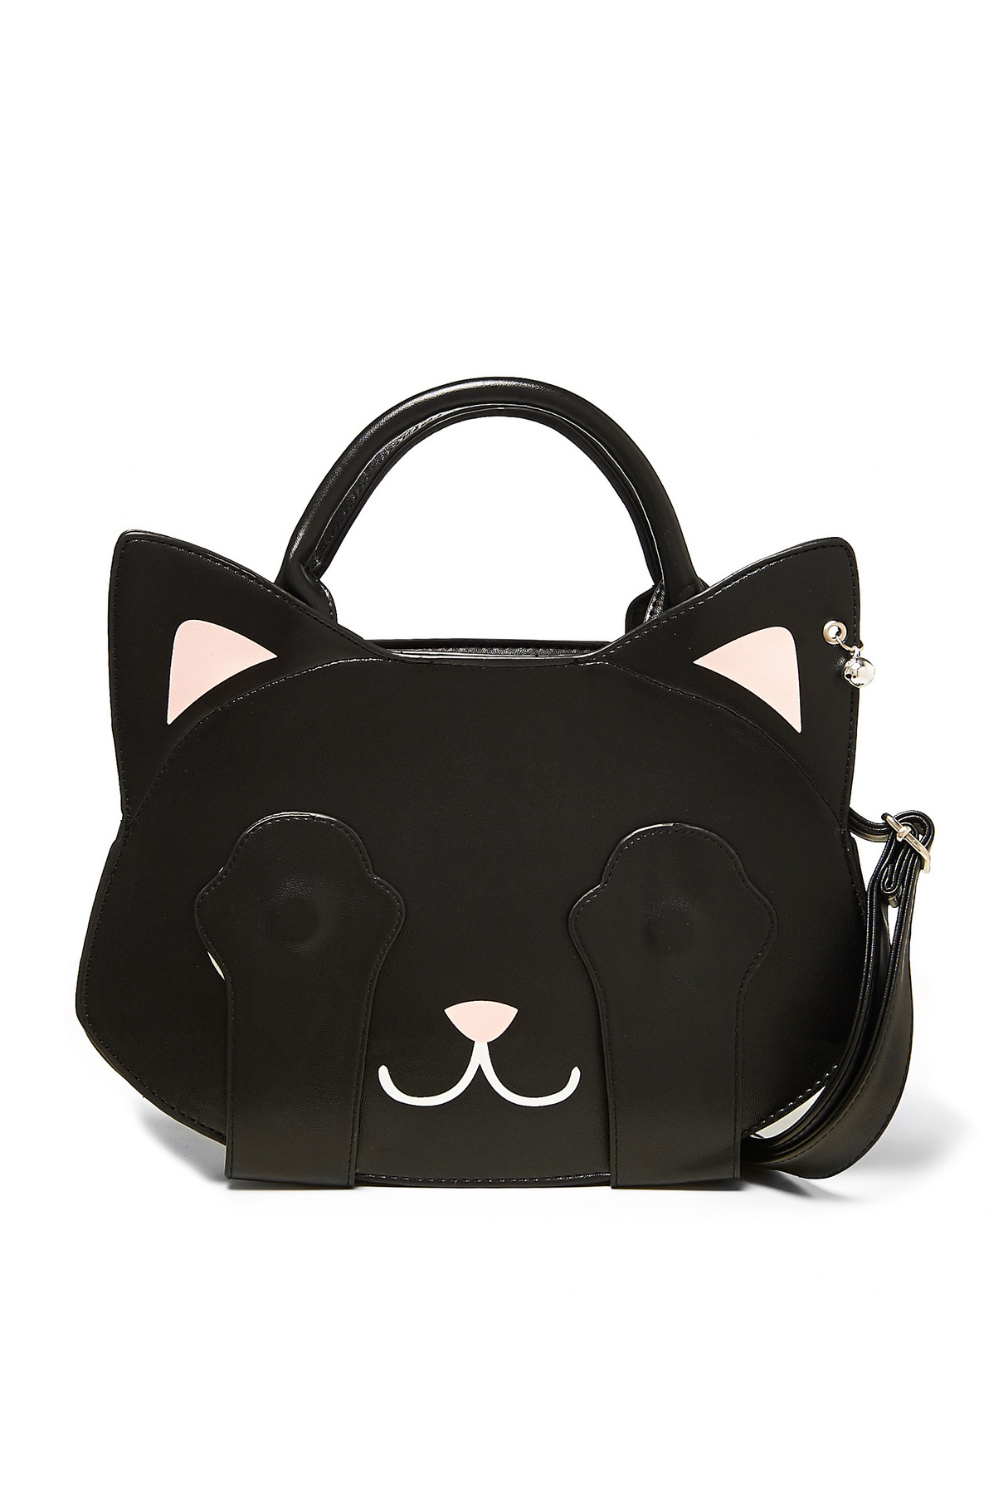 Black cat shaped handbag with extended paws hiding eyes